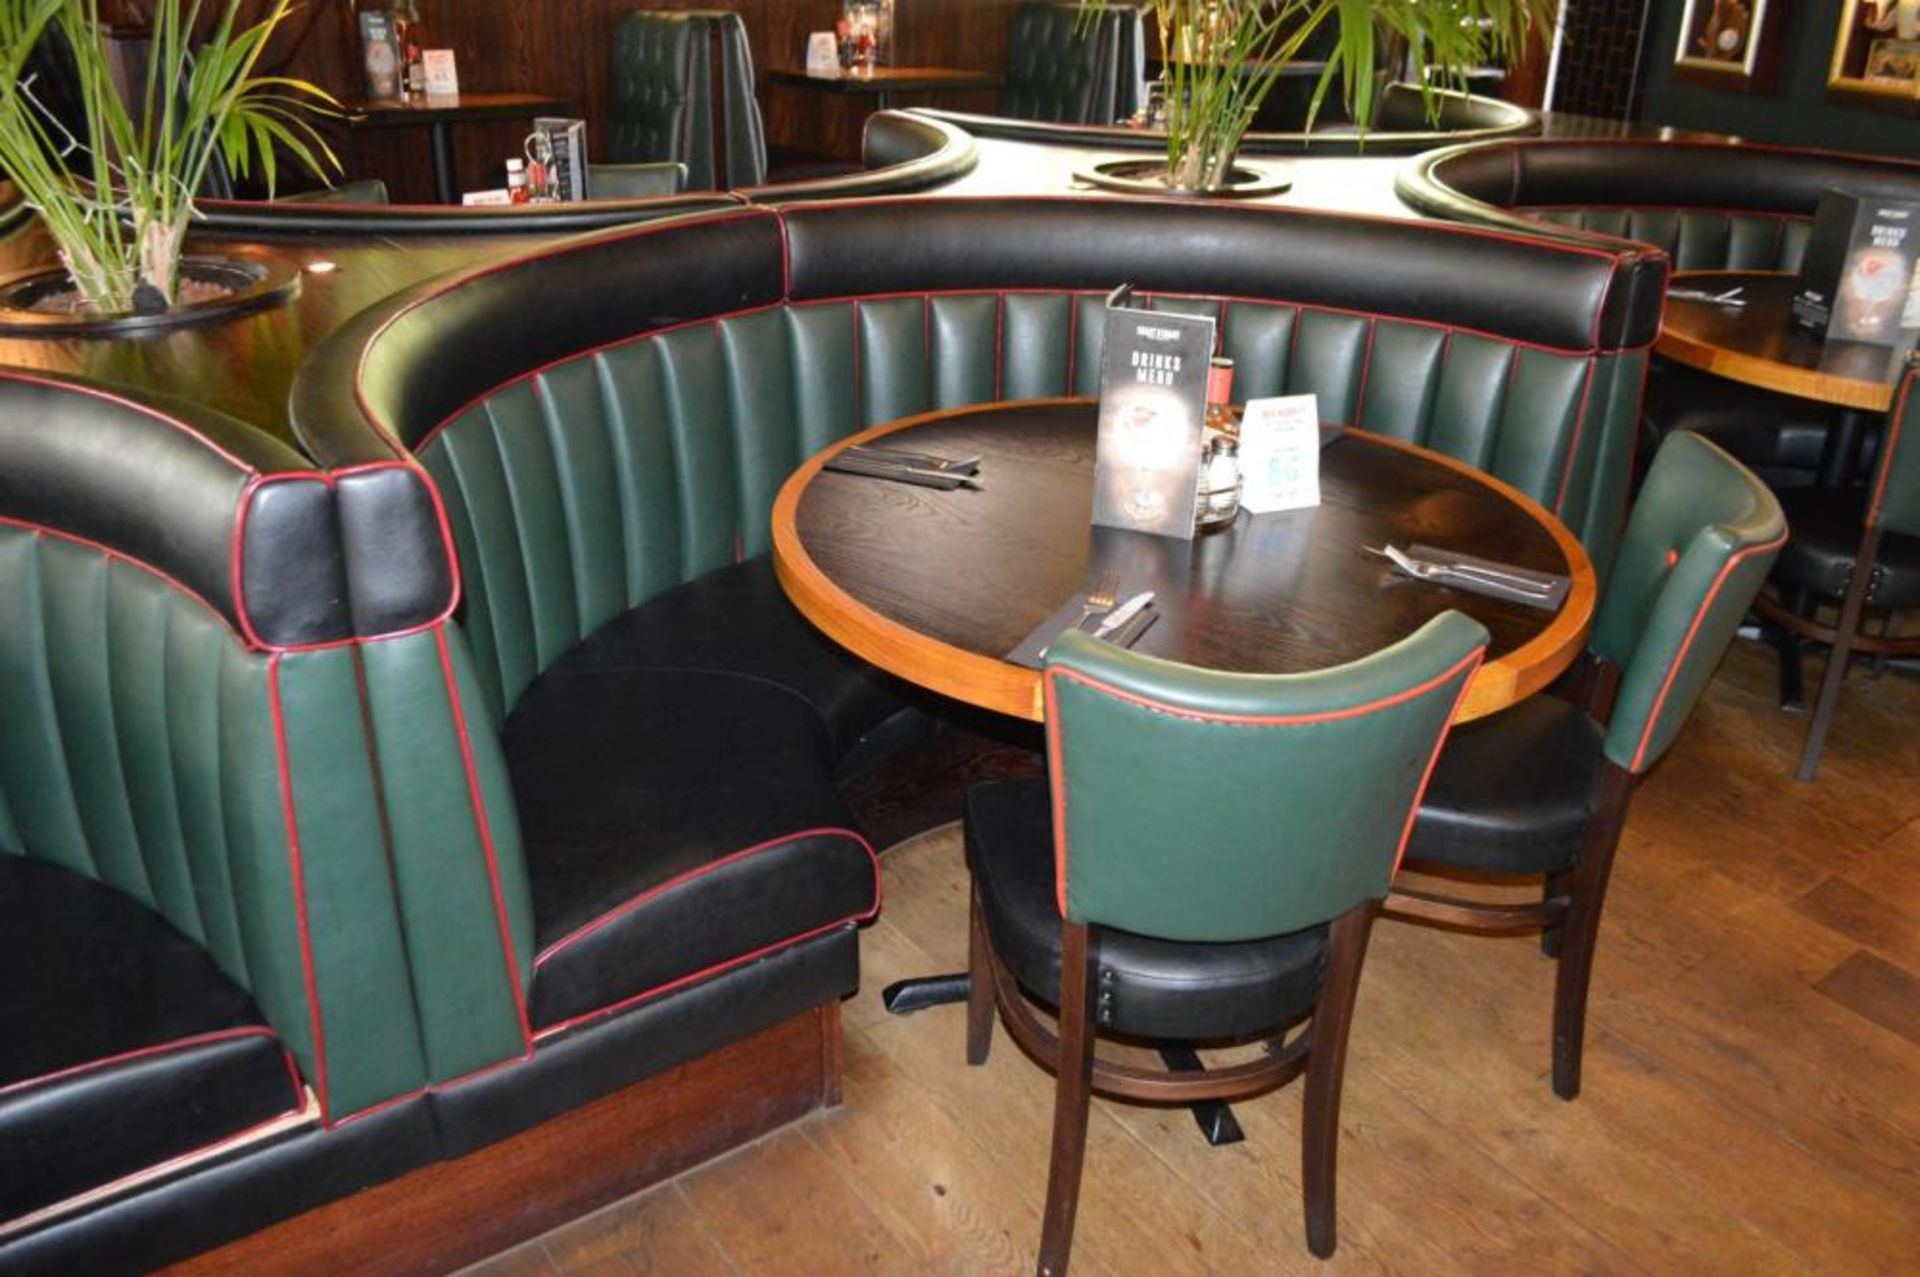 1 x Contemporary Half Circle Seating Booth - Features a Leather Upholstery in Green and Black, - Image 5 of 5